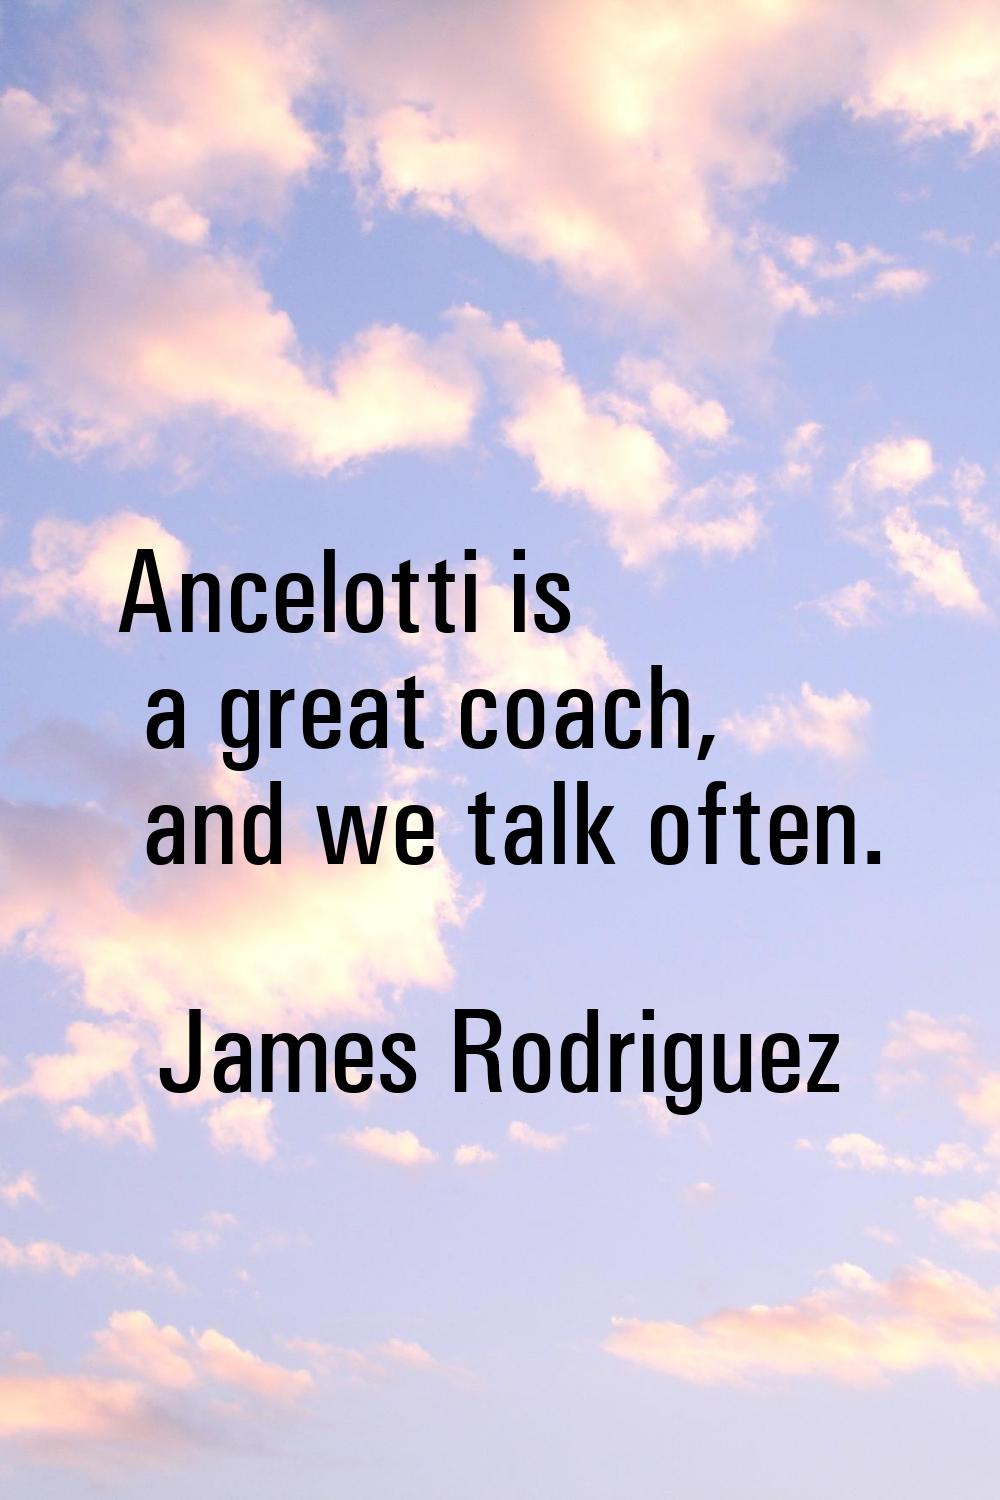 Ancelotti is a great coach, and we talk often.